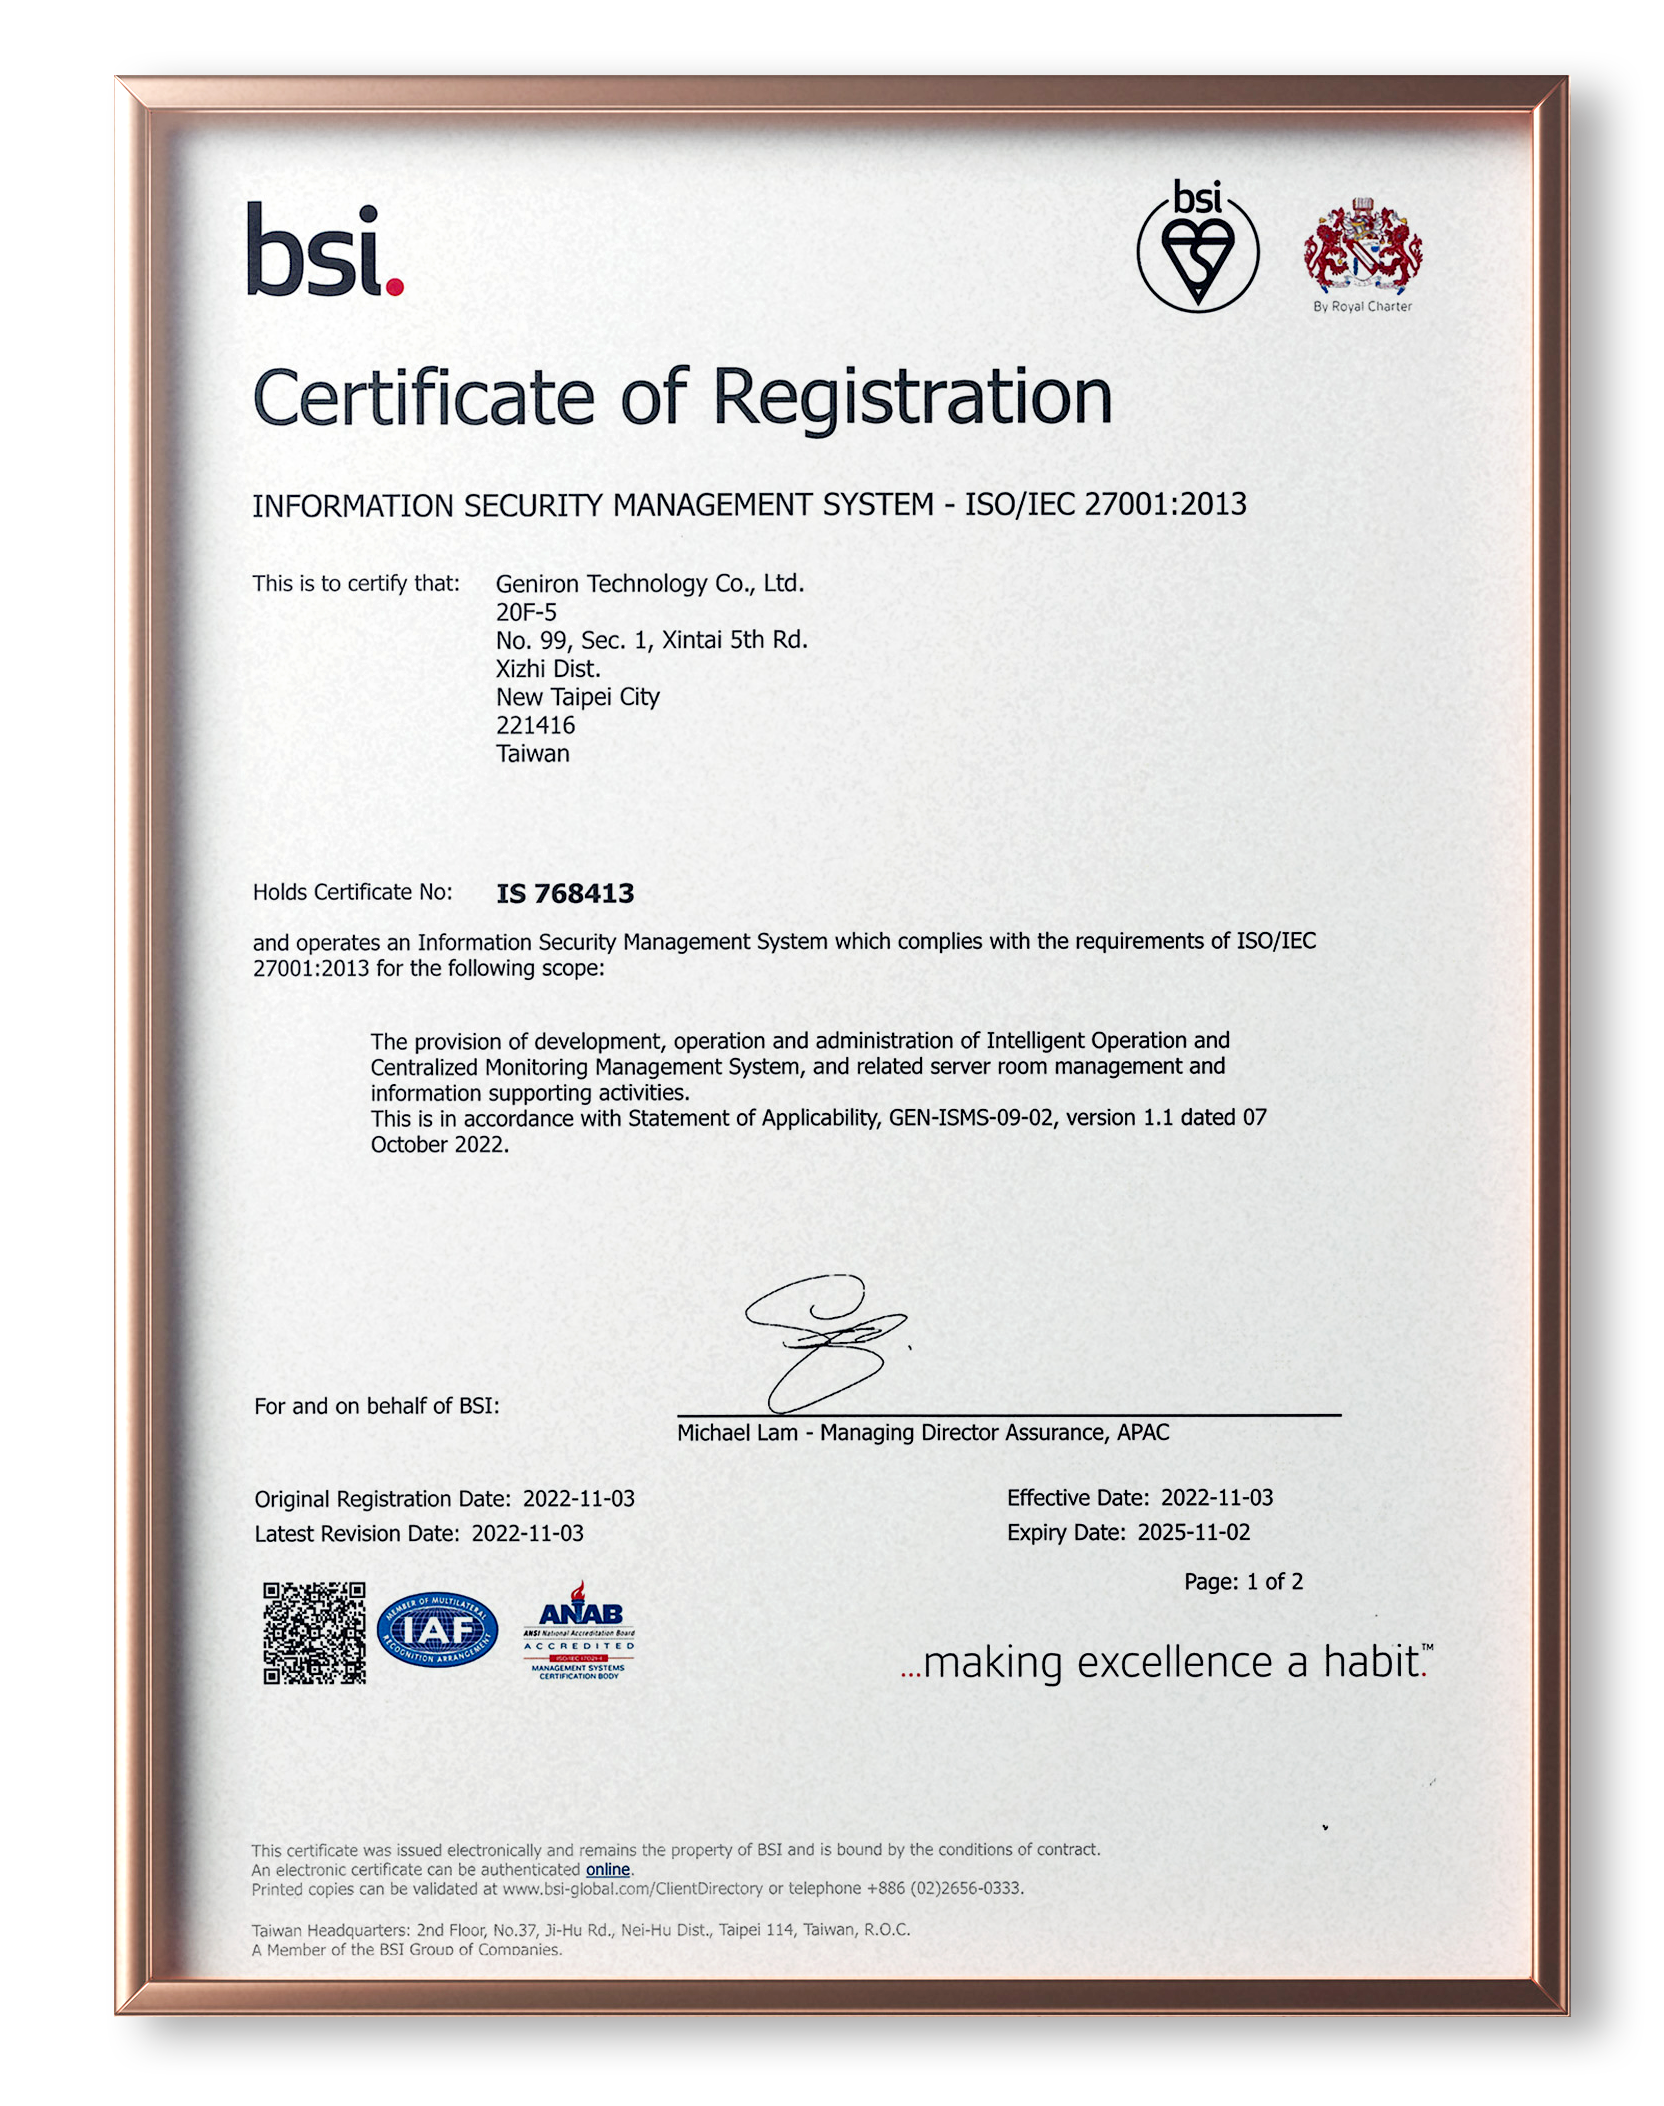 certificate_ISO27001.png (3.92 MB)